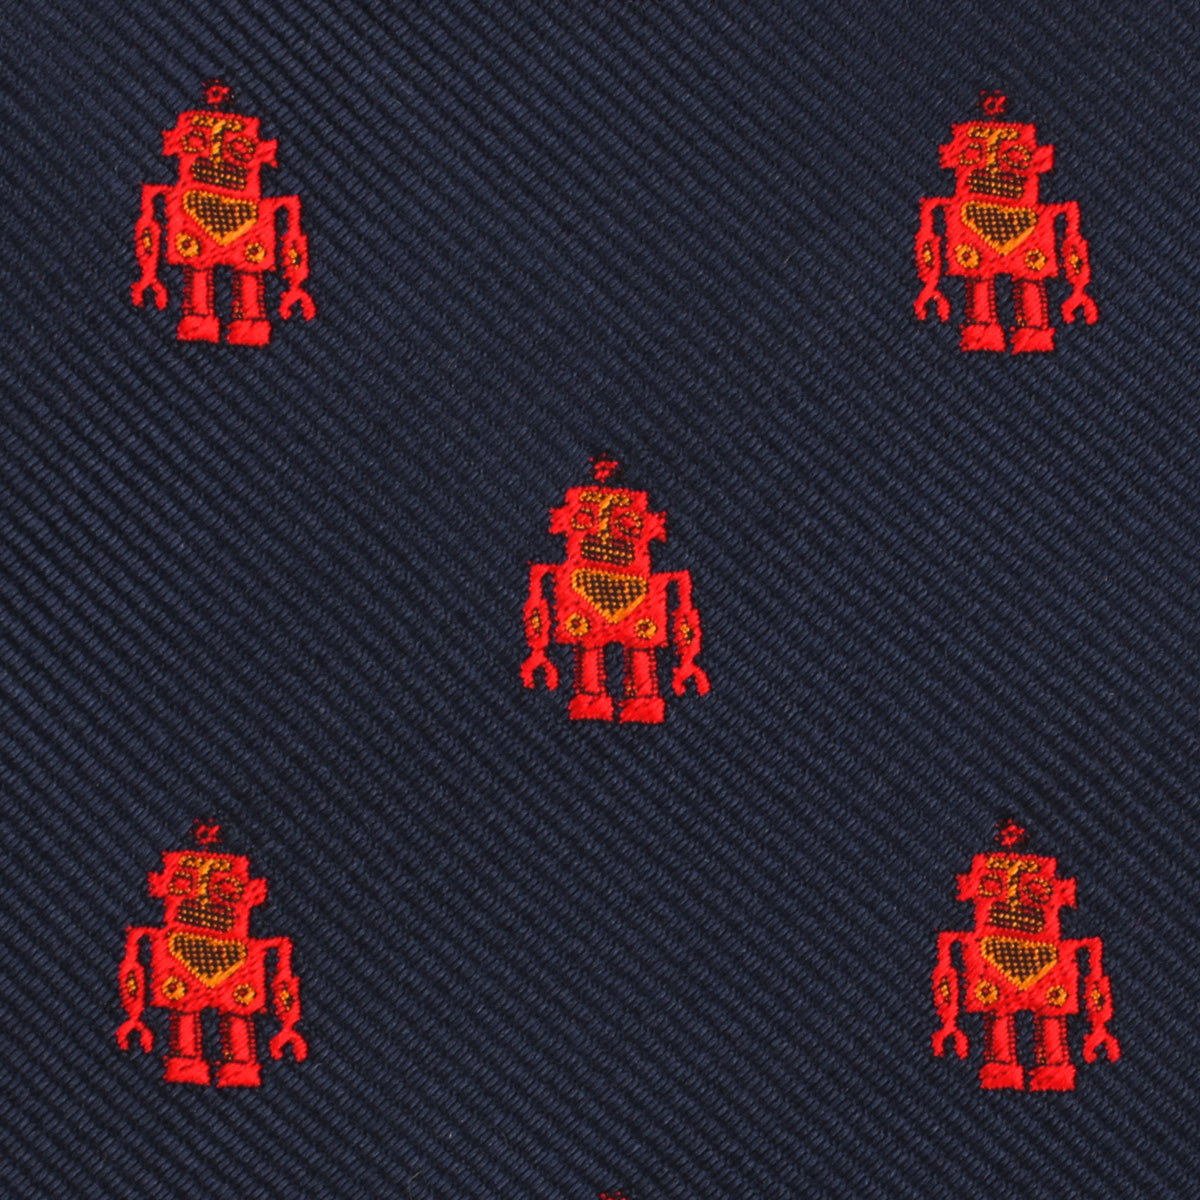 Angry Robot Self Bow Tie Fabric